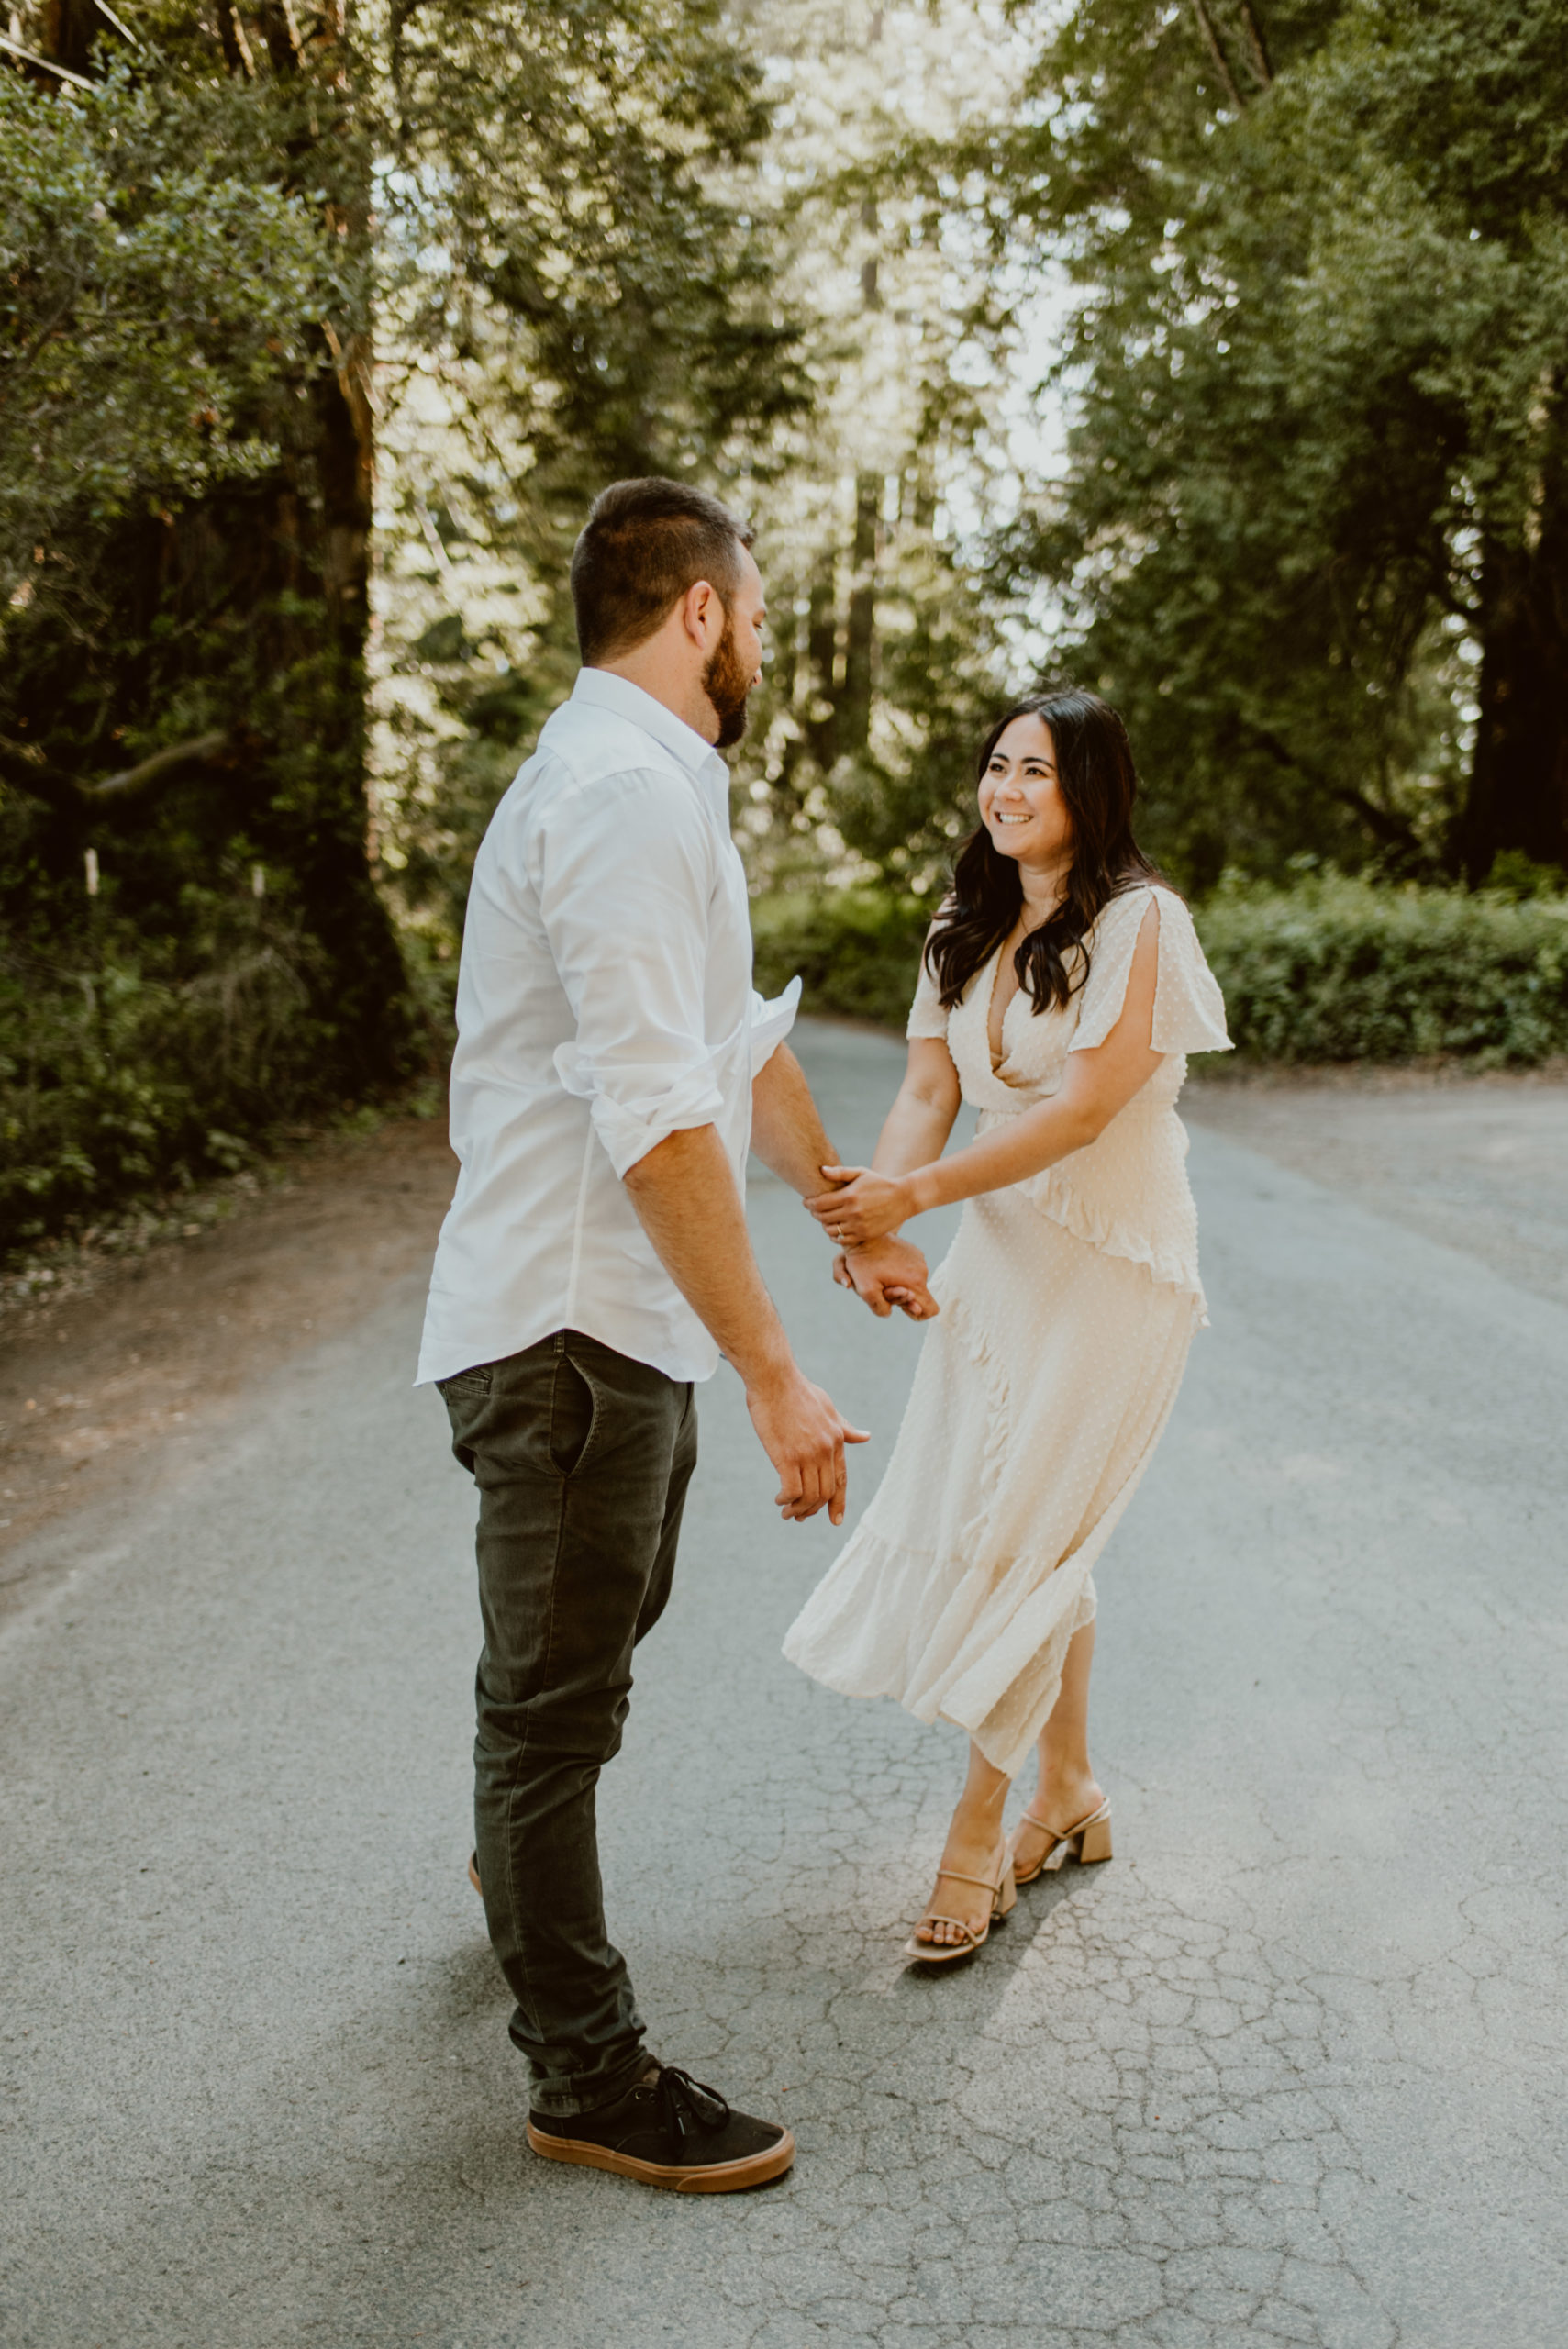 Feel like because you've never had pro photos taken, you'll be terrible at taking them? These two said the same. Read this post to see what the result was for this redwood engagement session.